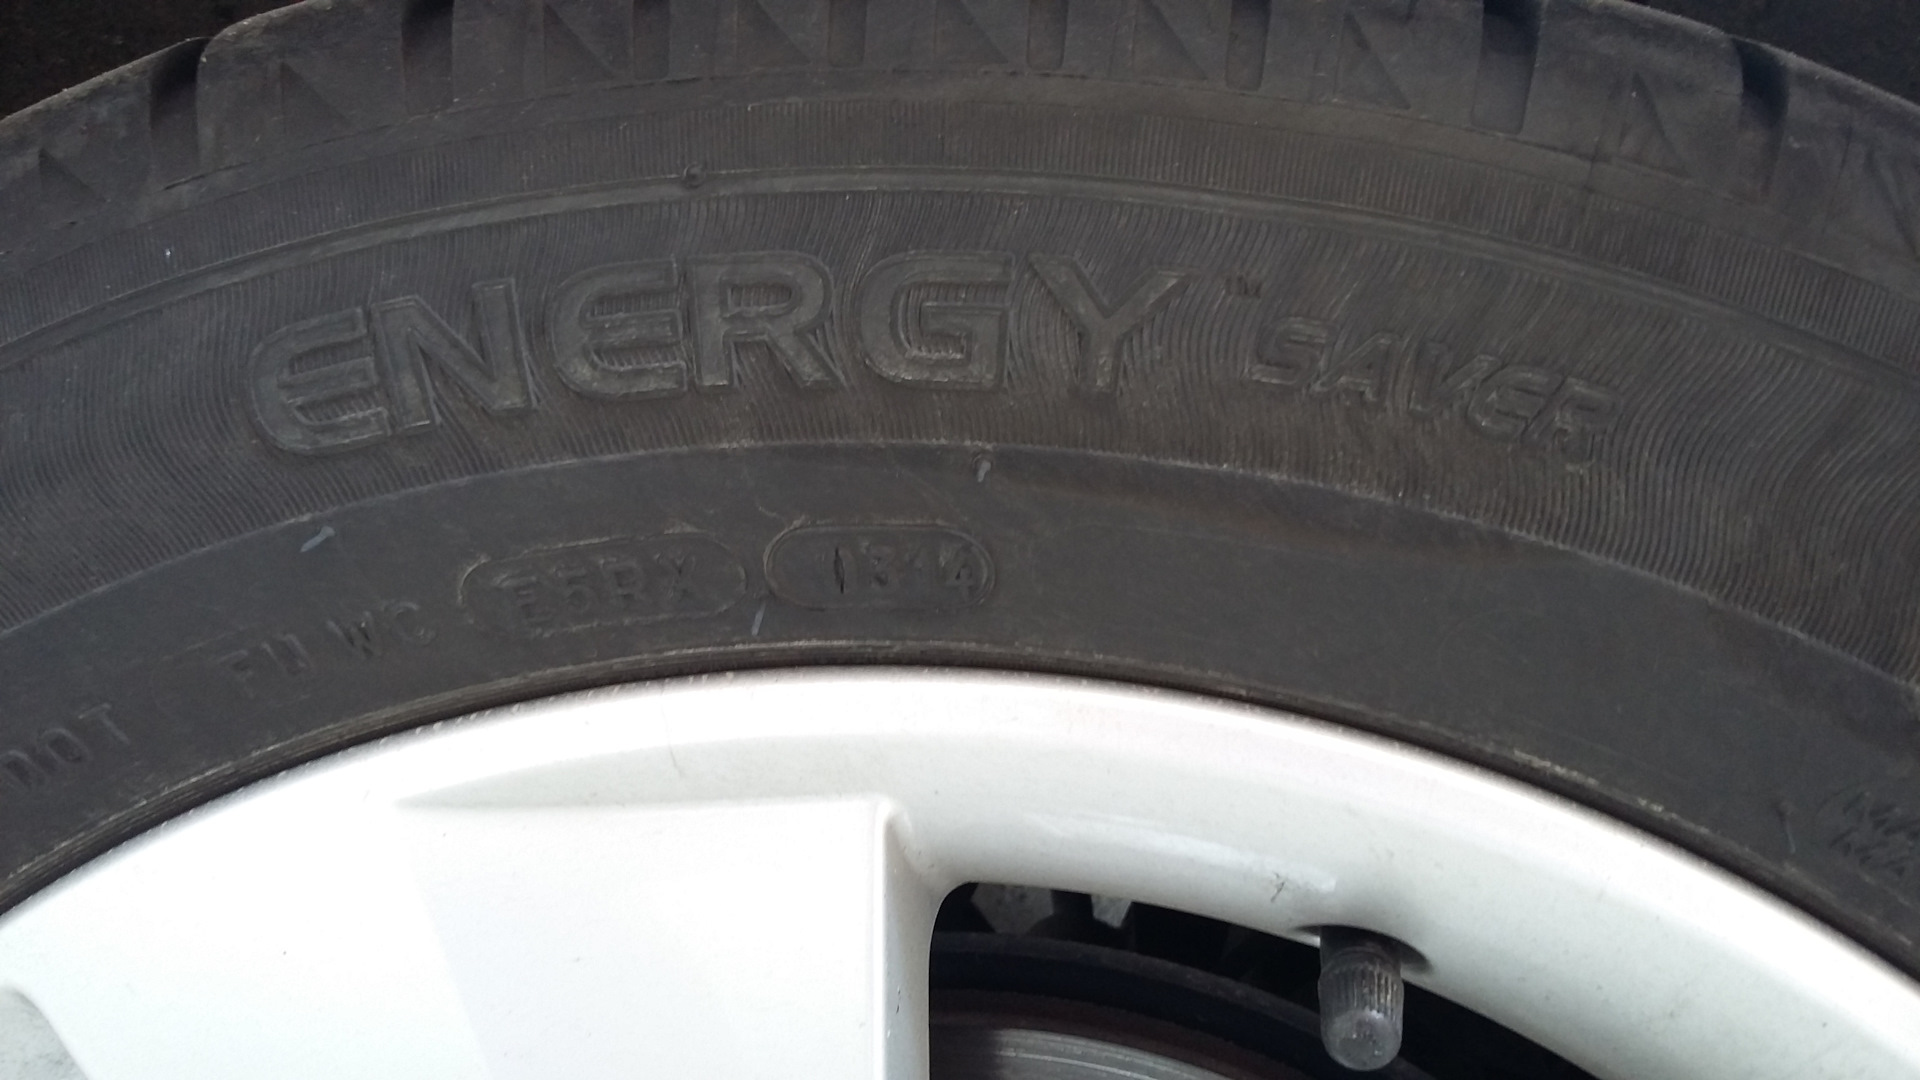 Michelin 205/55 r16 Radial x Tubeless. Michelin Tubeless 205/55 r16. 205 55 R16 used Tires. Бел-261 205/55 r16 28 фото.